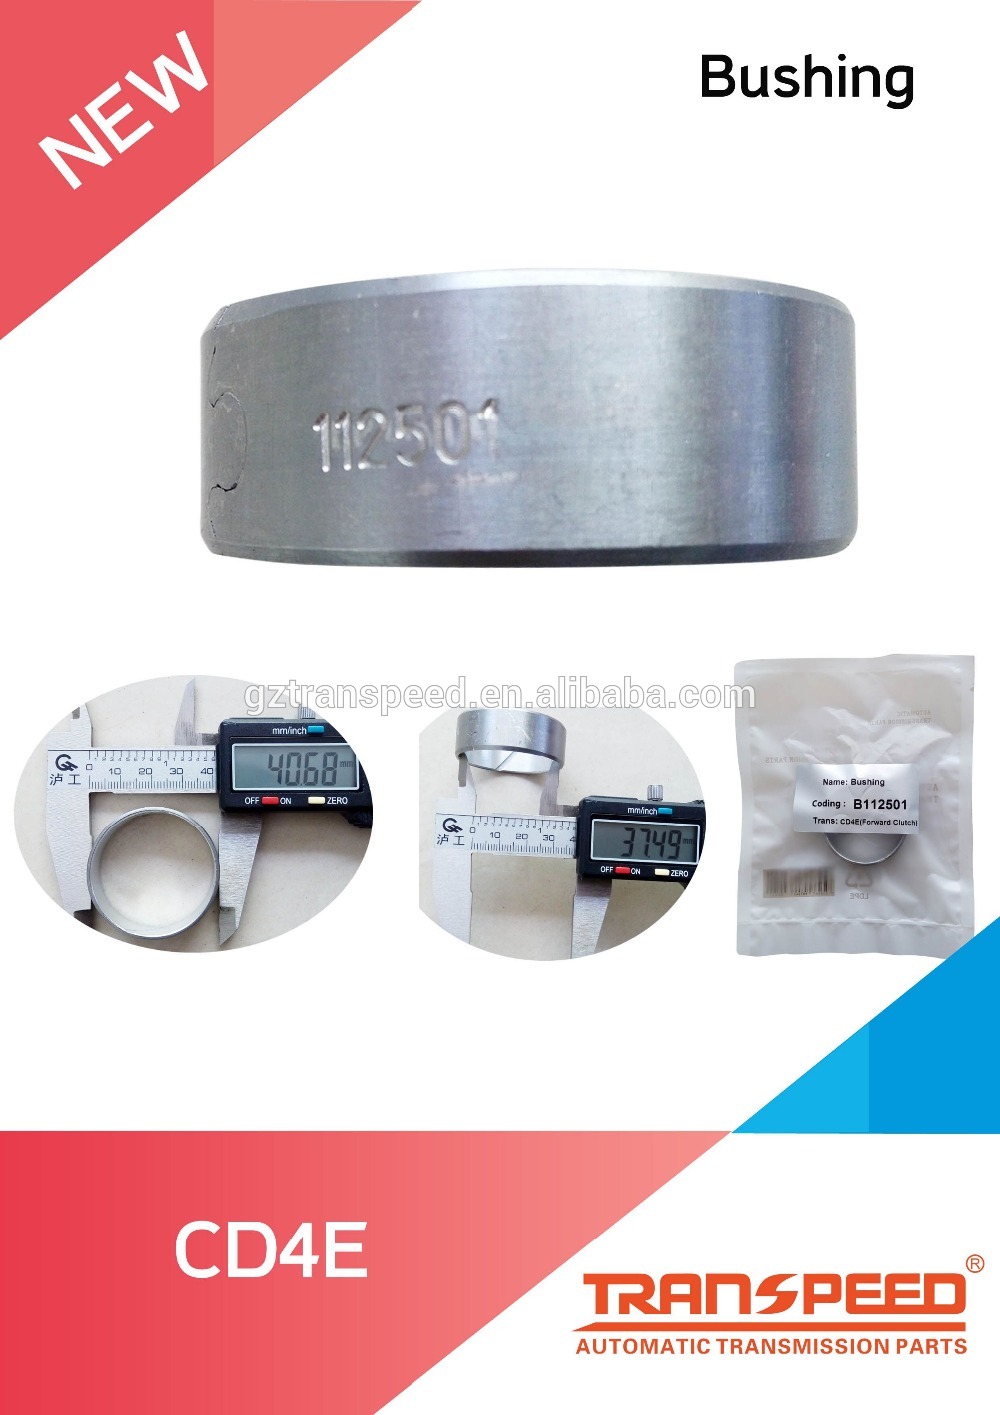 Transpeed automatic transmission bushing transmission double faced drum CD4E